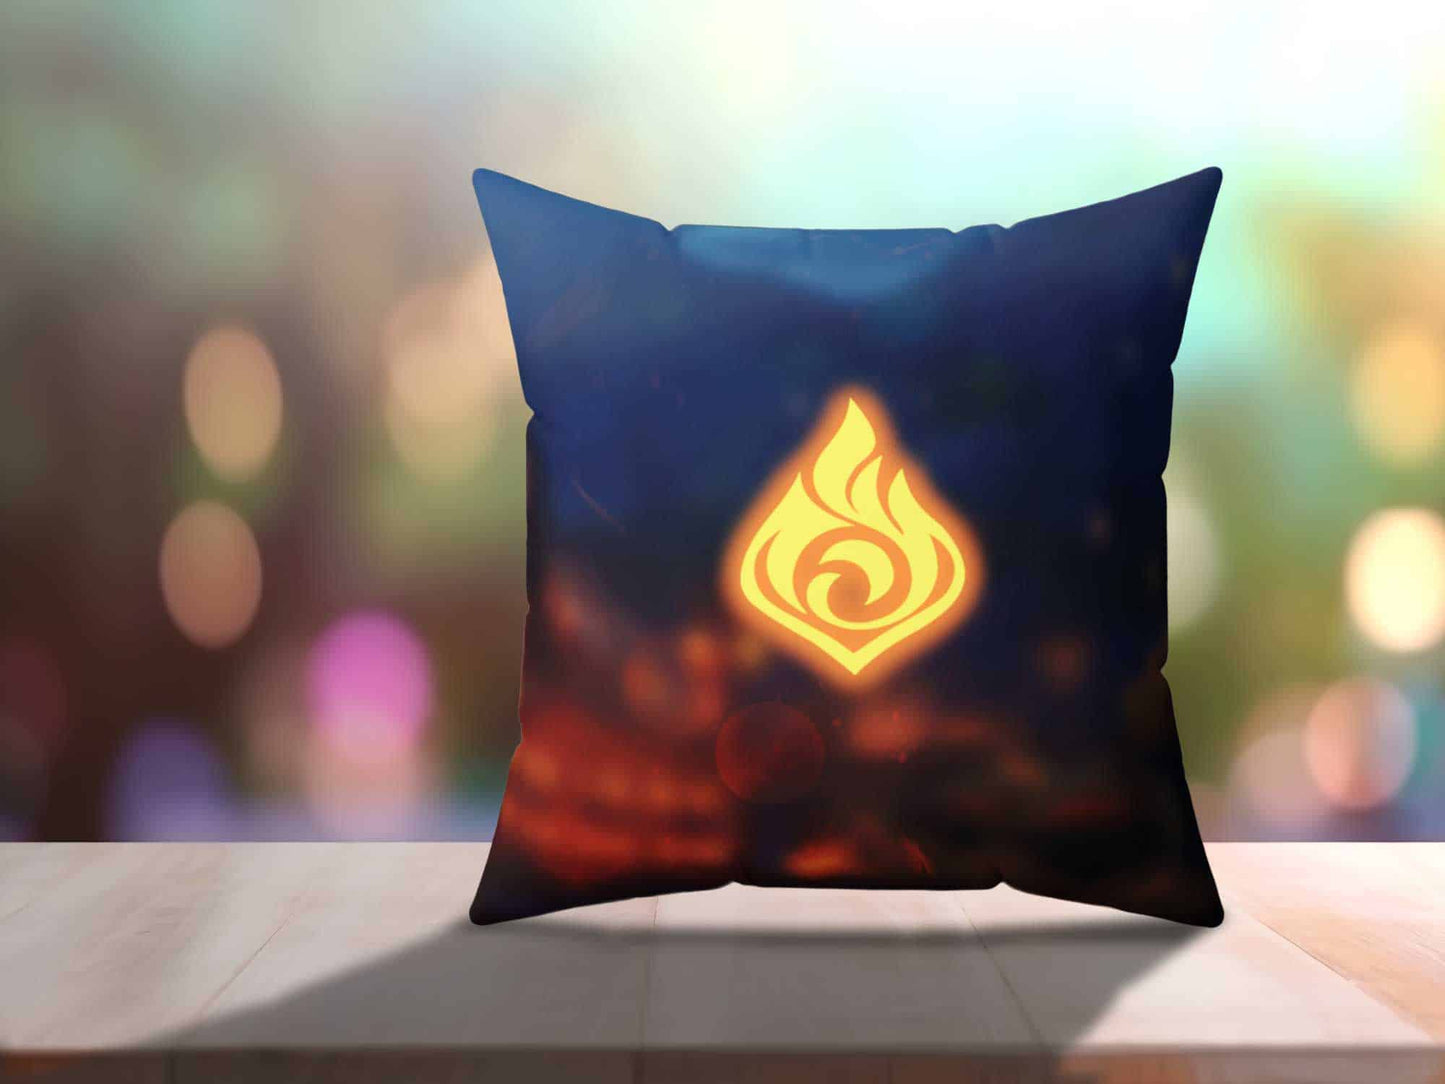 Hu Tao Square Pillow (Limited Edition Fan Made) -